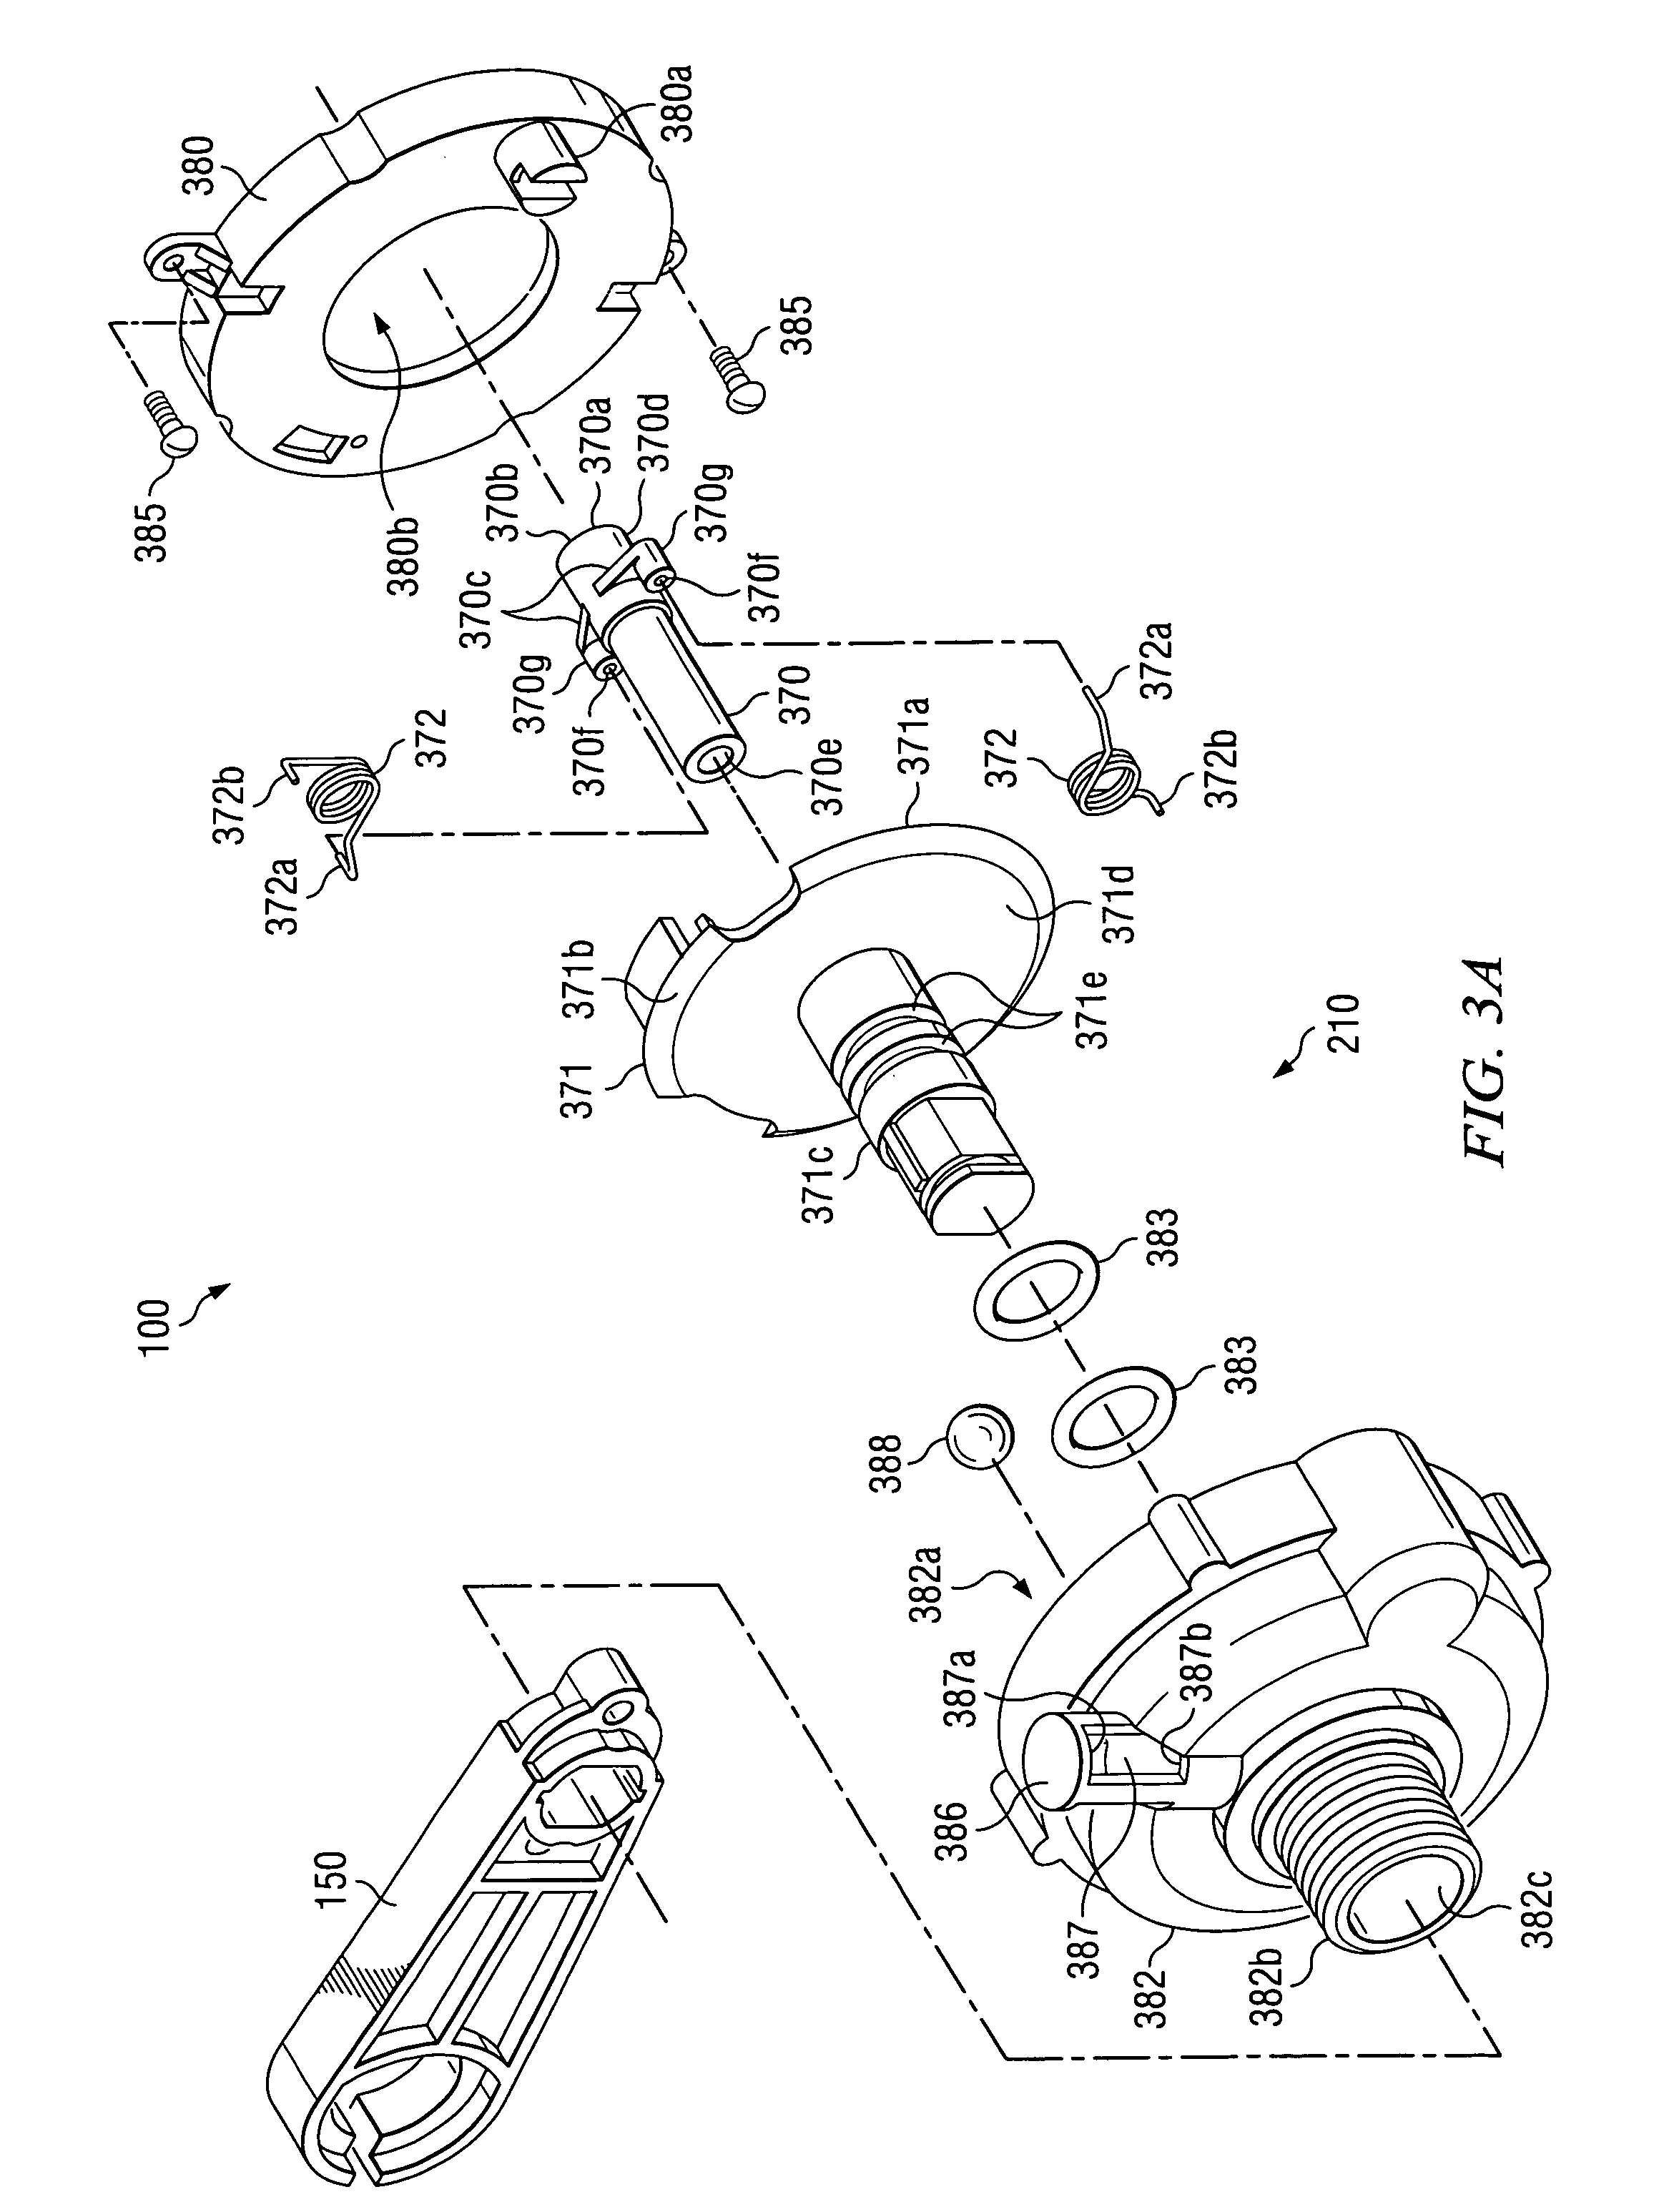 Adjustable rating for a fault interrupter and load break switch